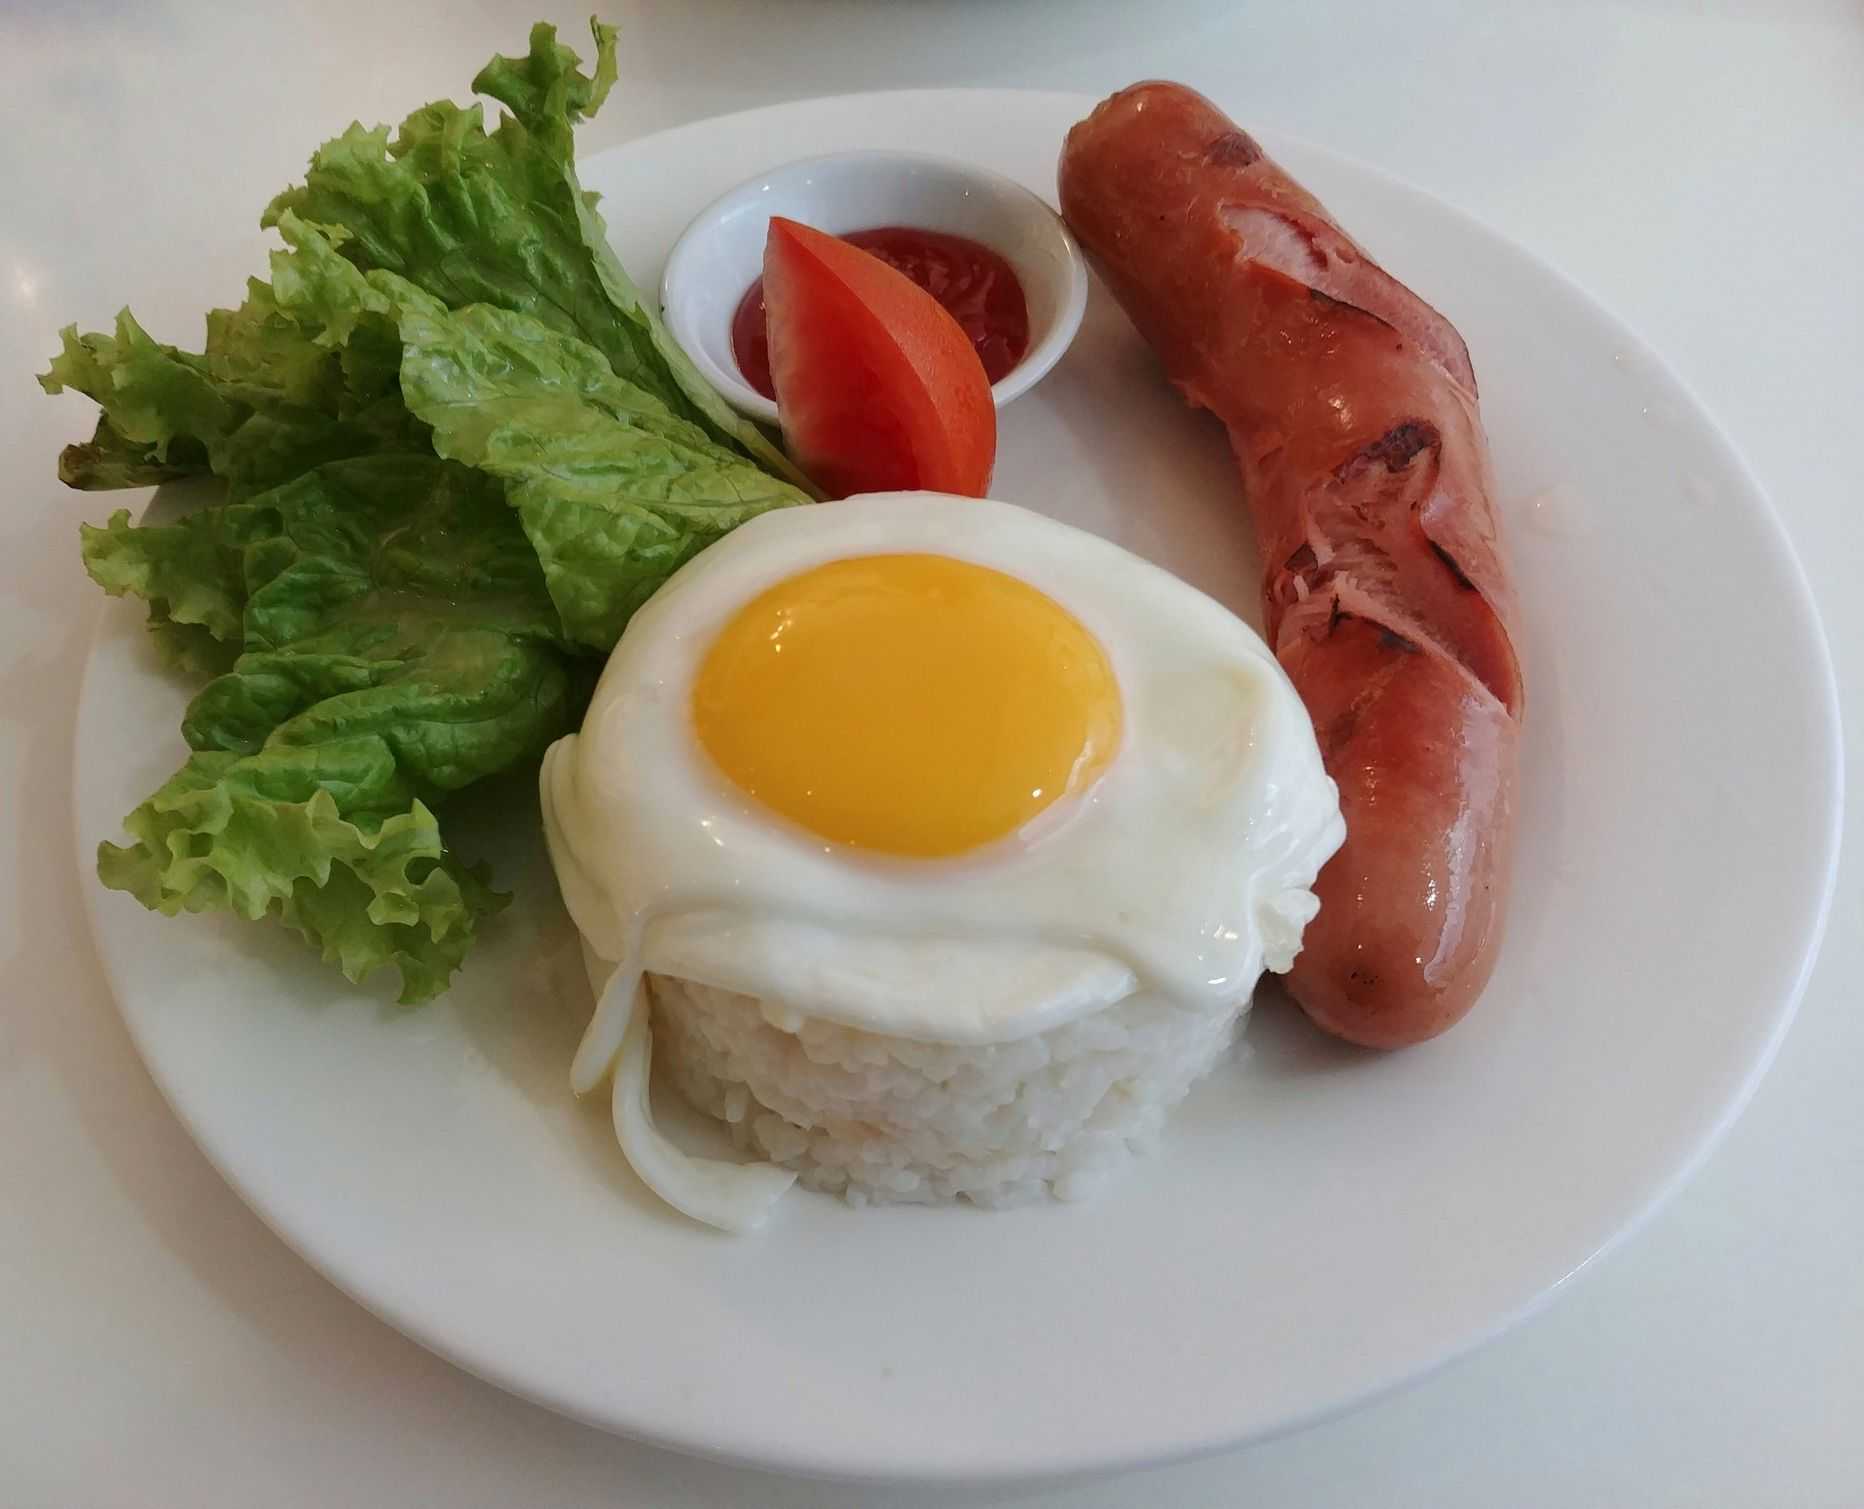 Grilled sausage meal from Plan B Cafe at St. Luke's BGC